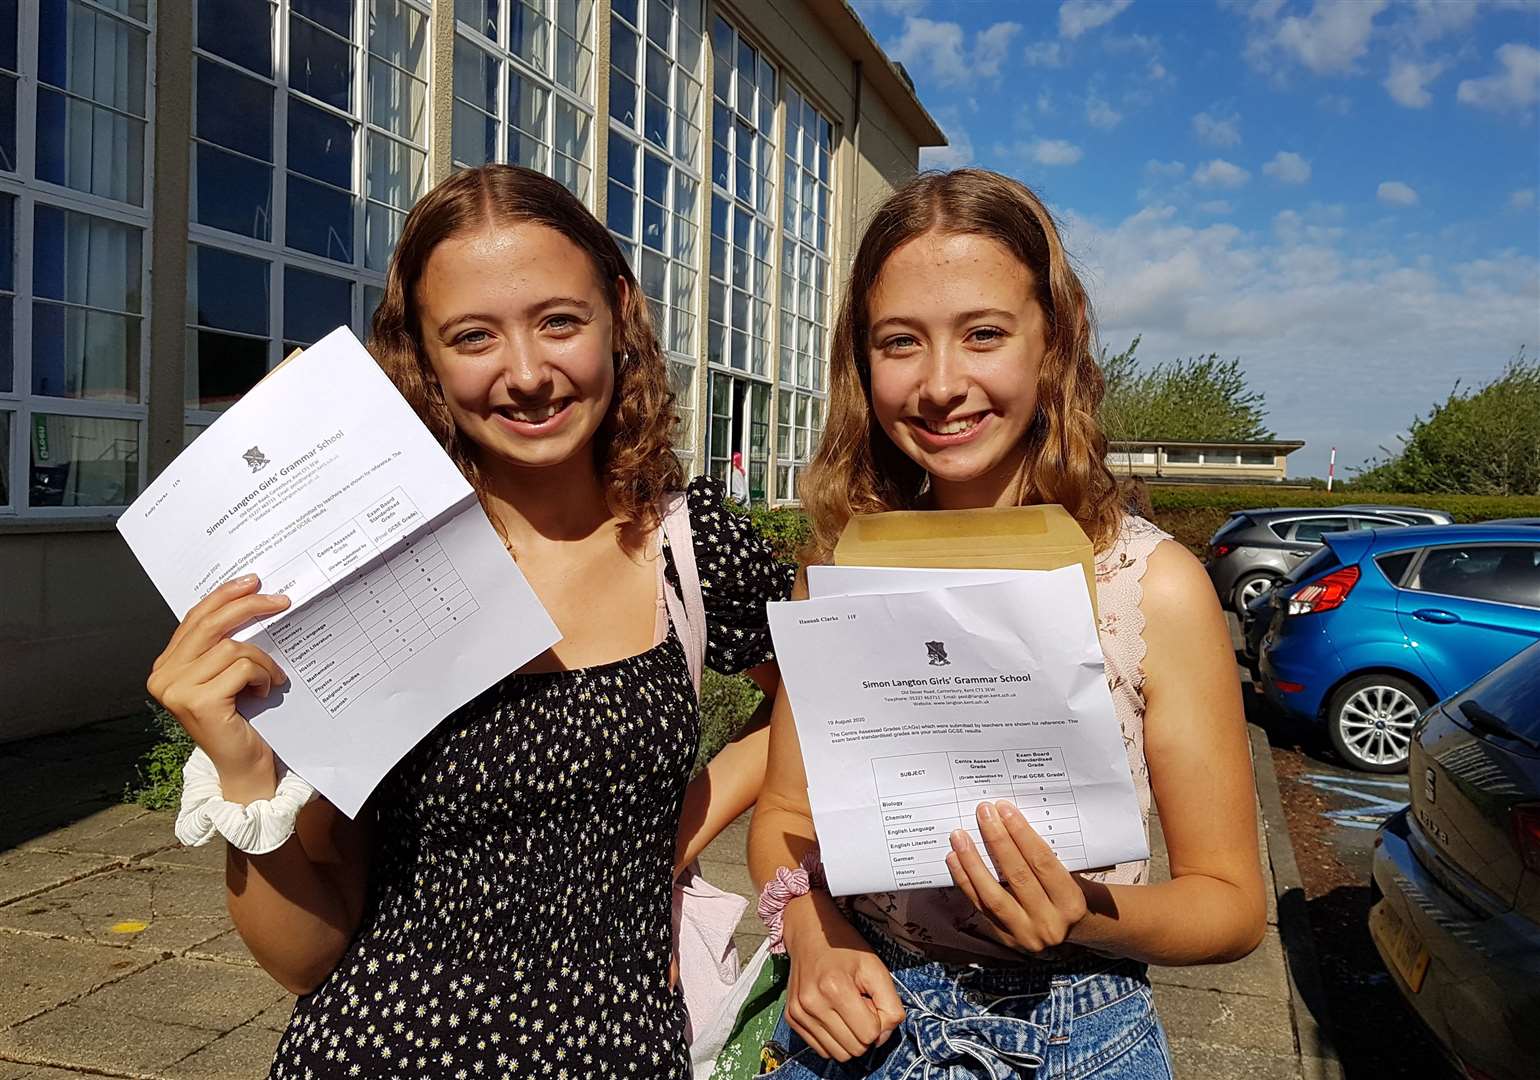 Left to right: Twins Emilyand Hannah Clarke from Langton Girls School getting their results